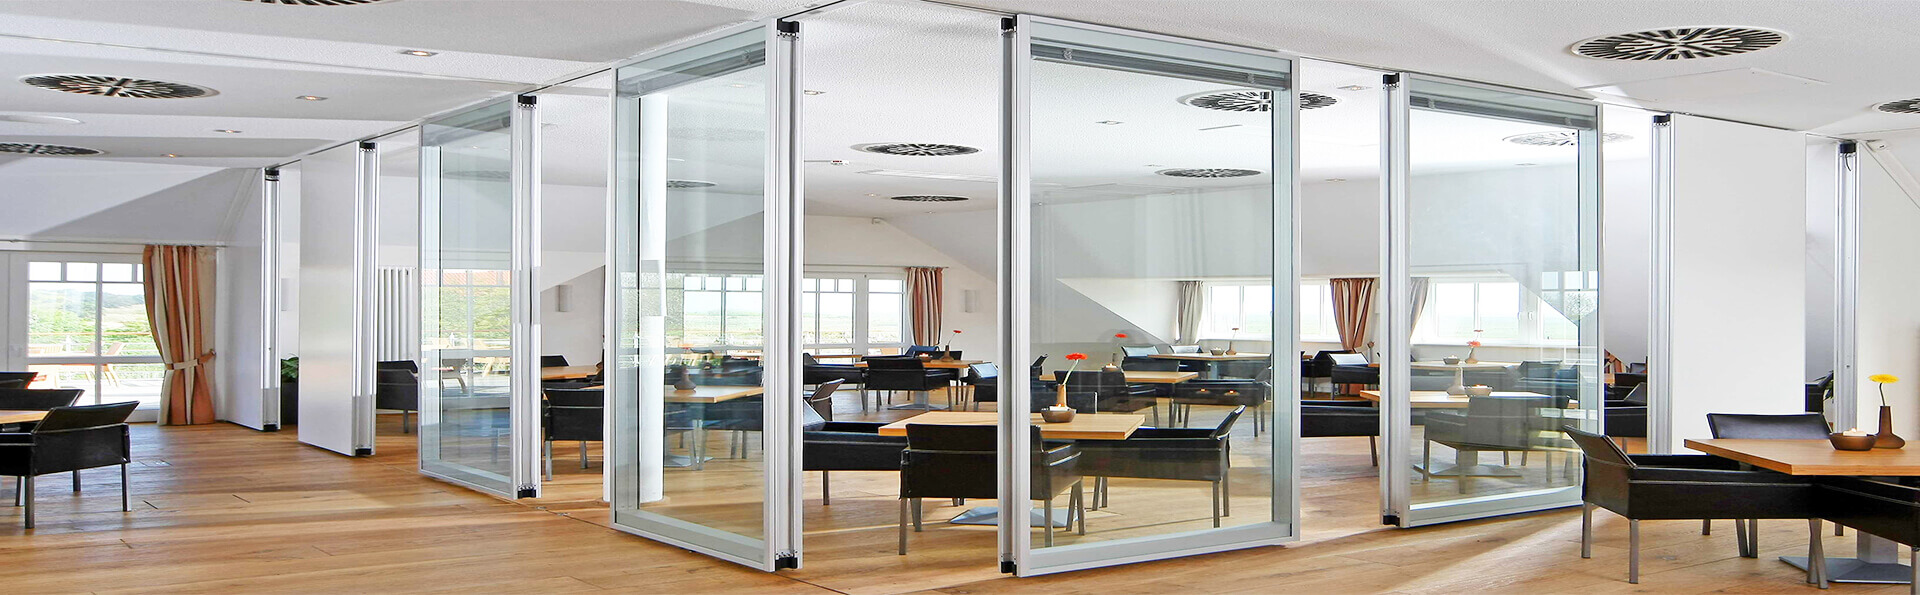 interior-hanging-with-white-stainless-frame-glass-room-partitions